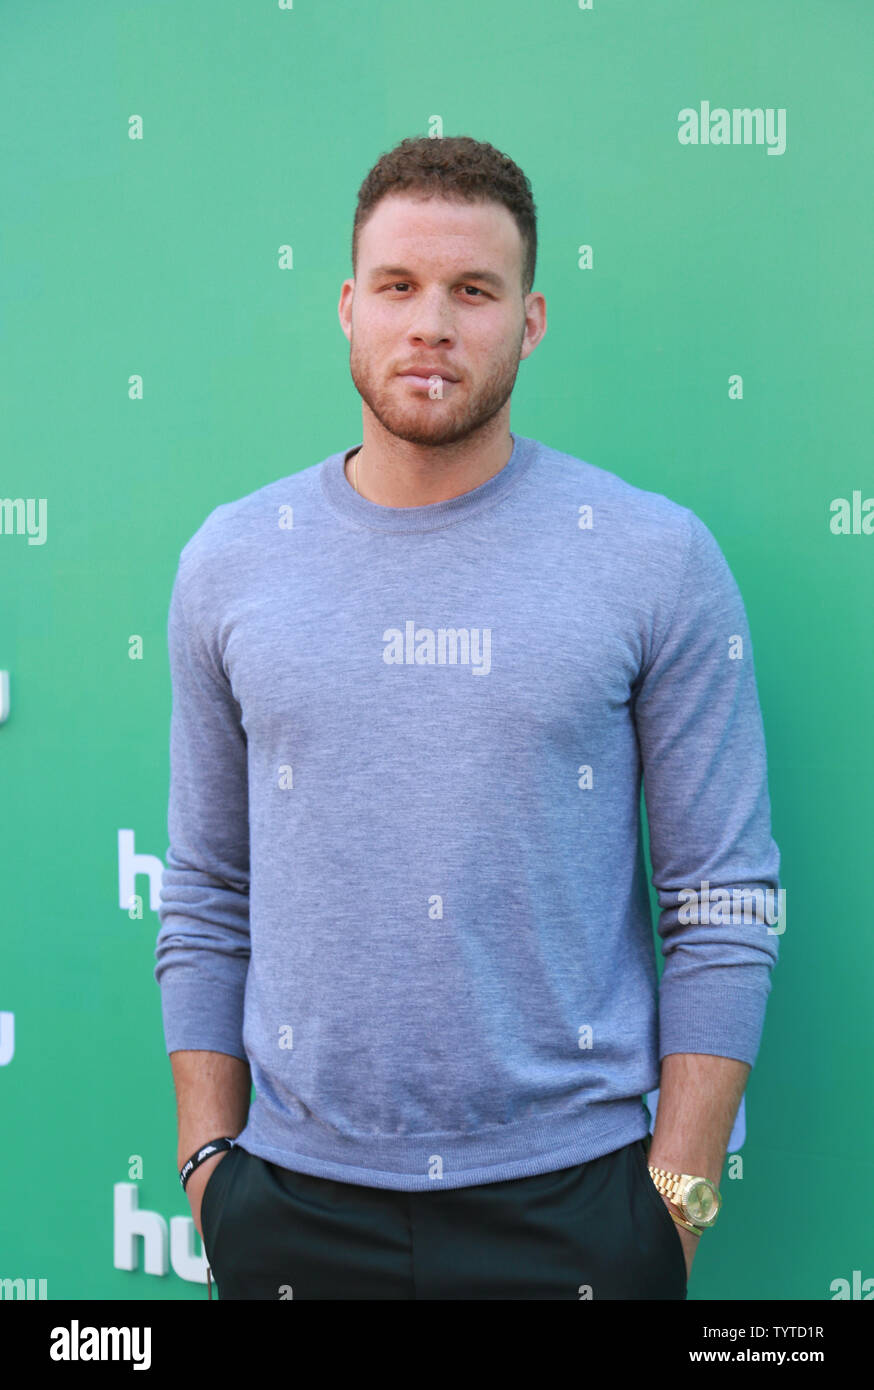 Blake Griffin Photograph by Juan Ocampo - Pixels